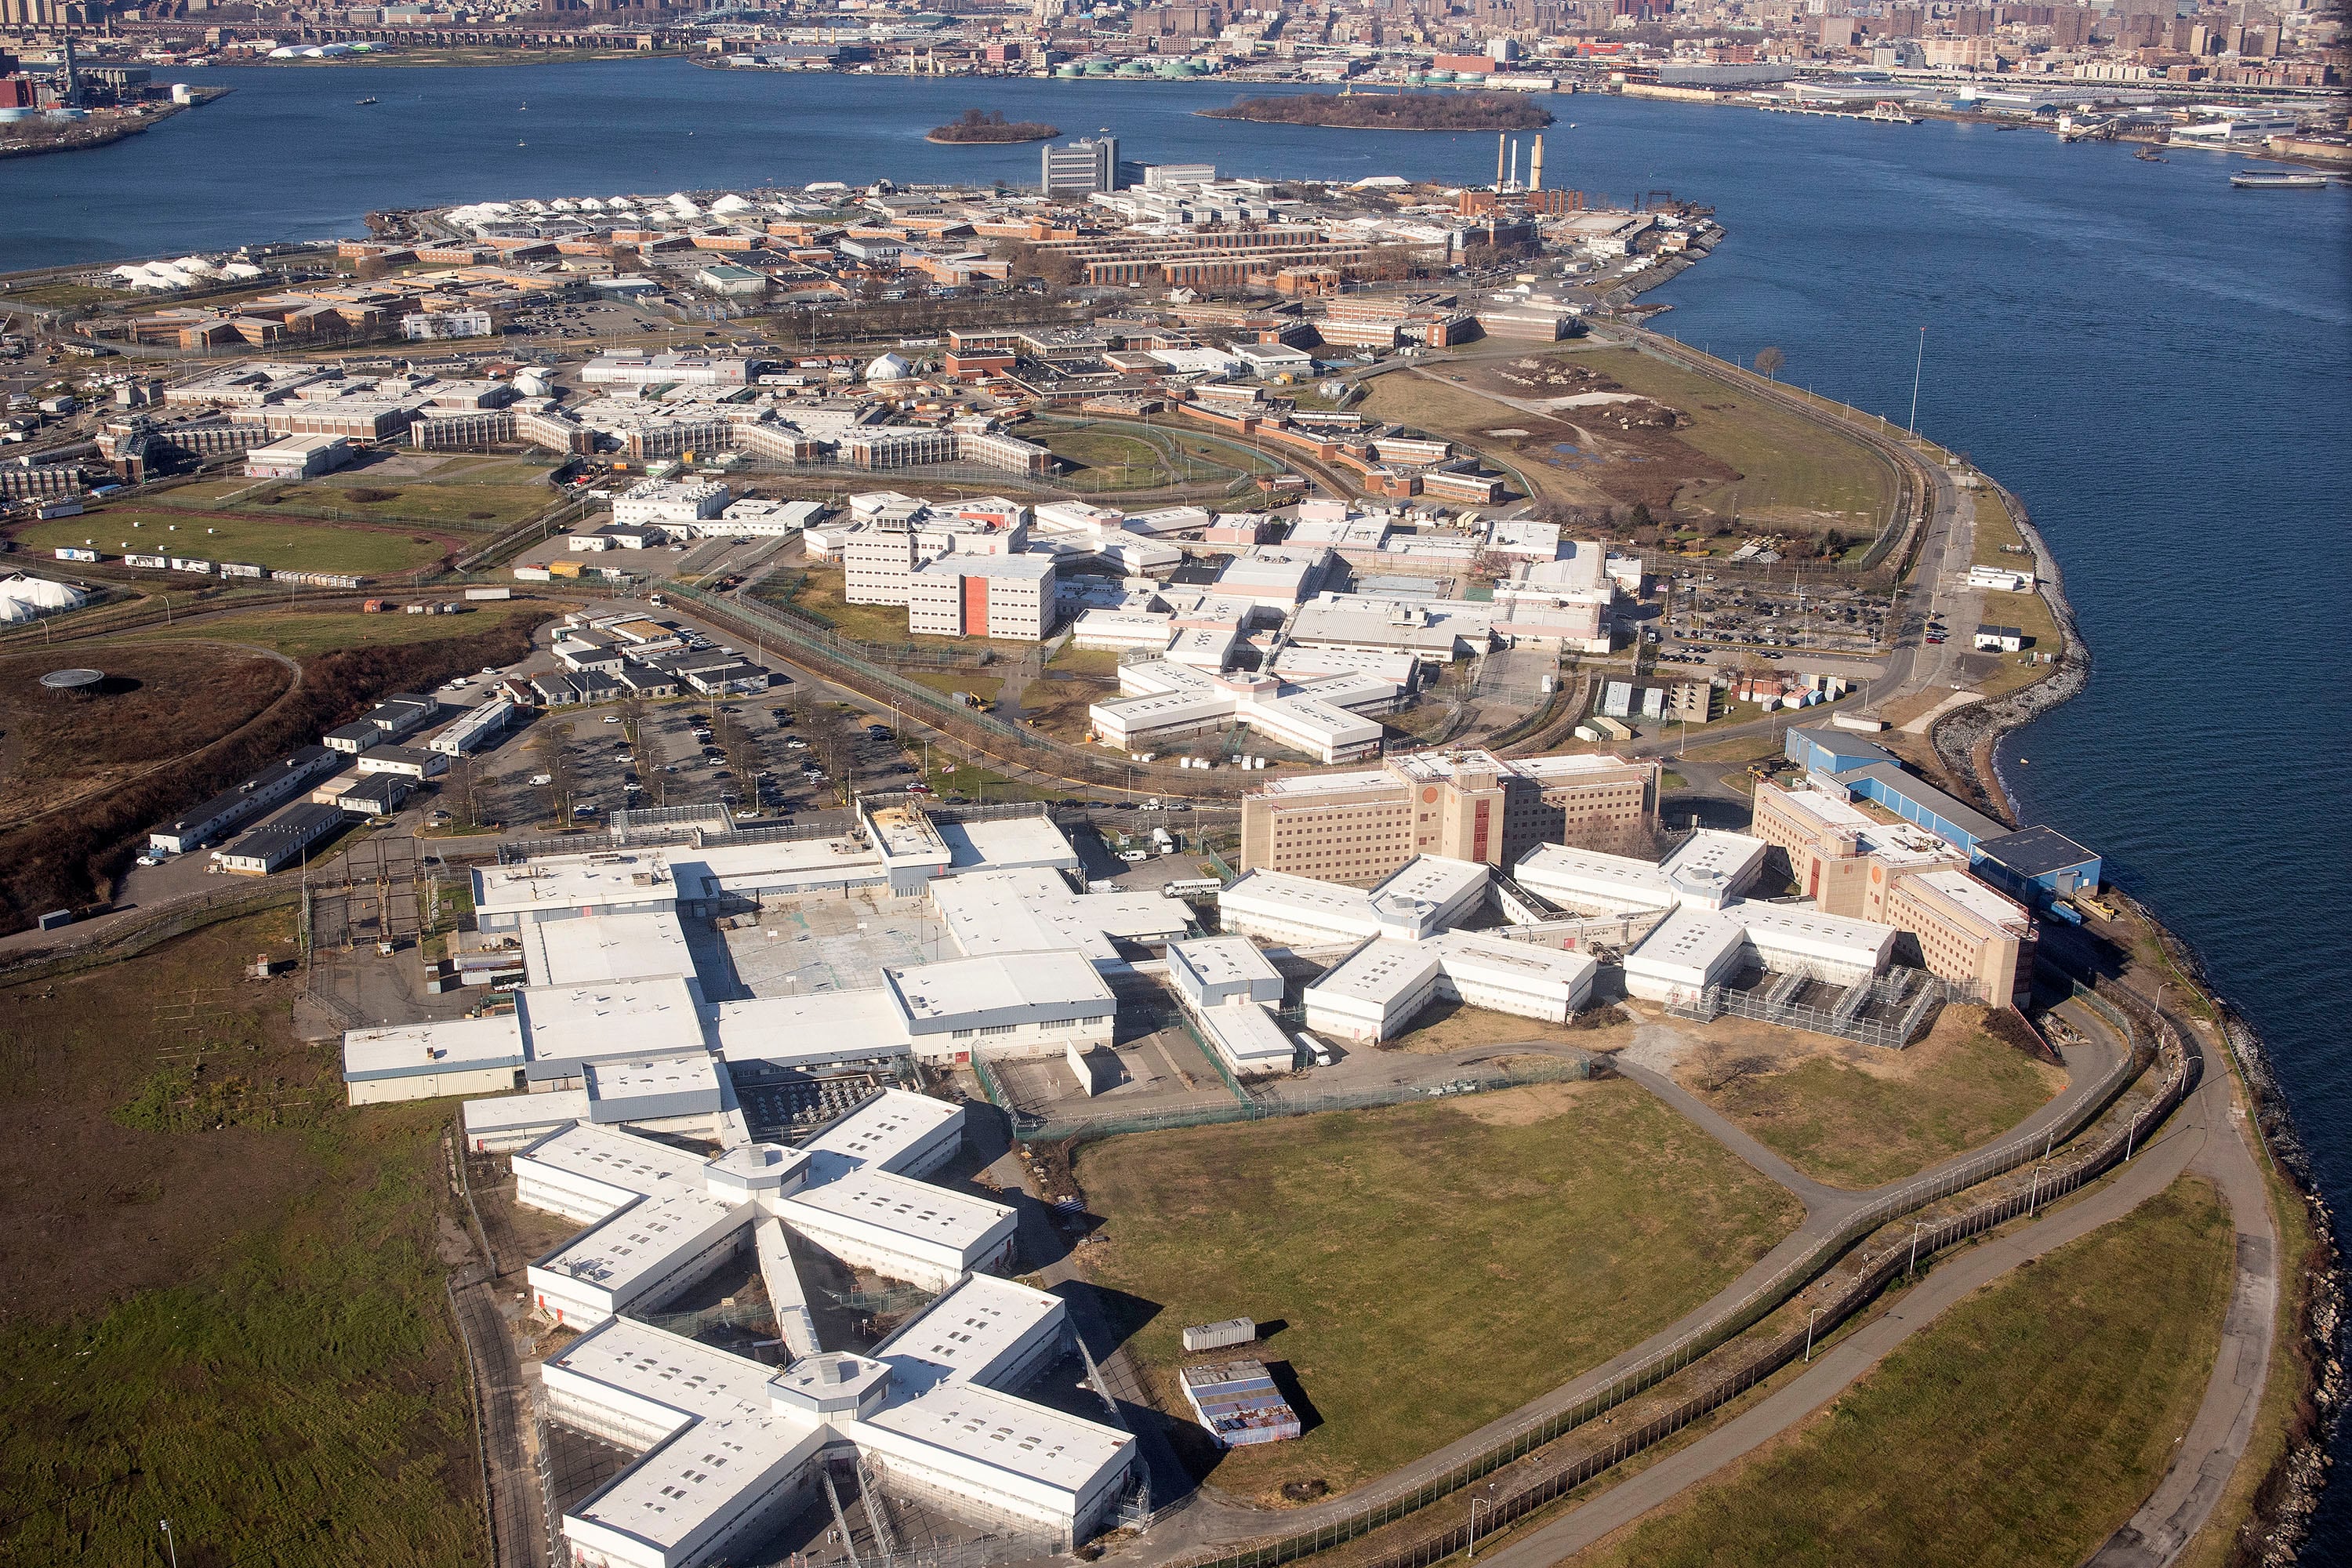 A bird's eye view of part of an island with a prison facility taking up most of the space with a river surrounding the island and a cityscape in the background.